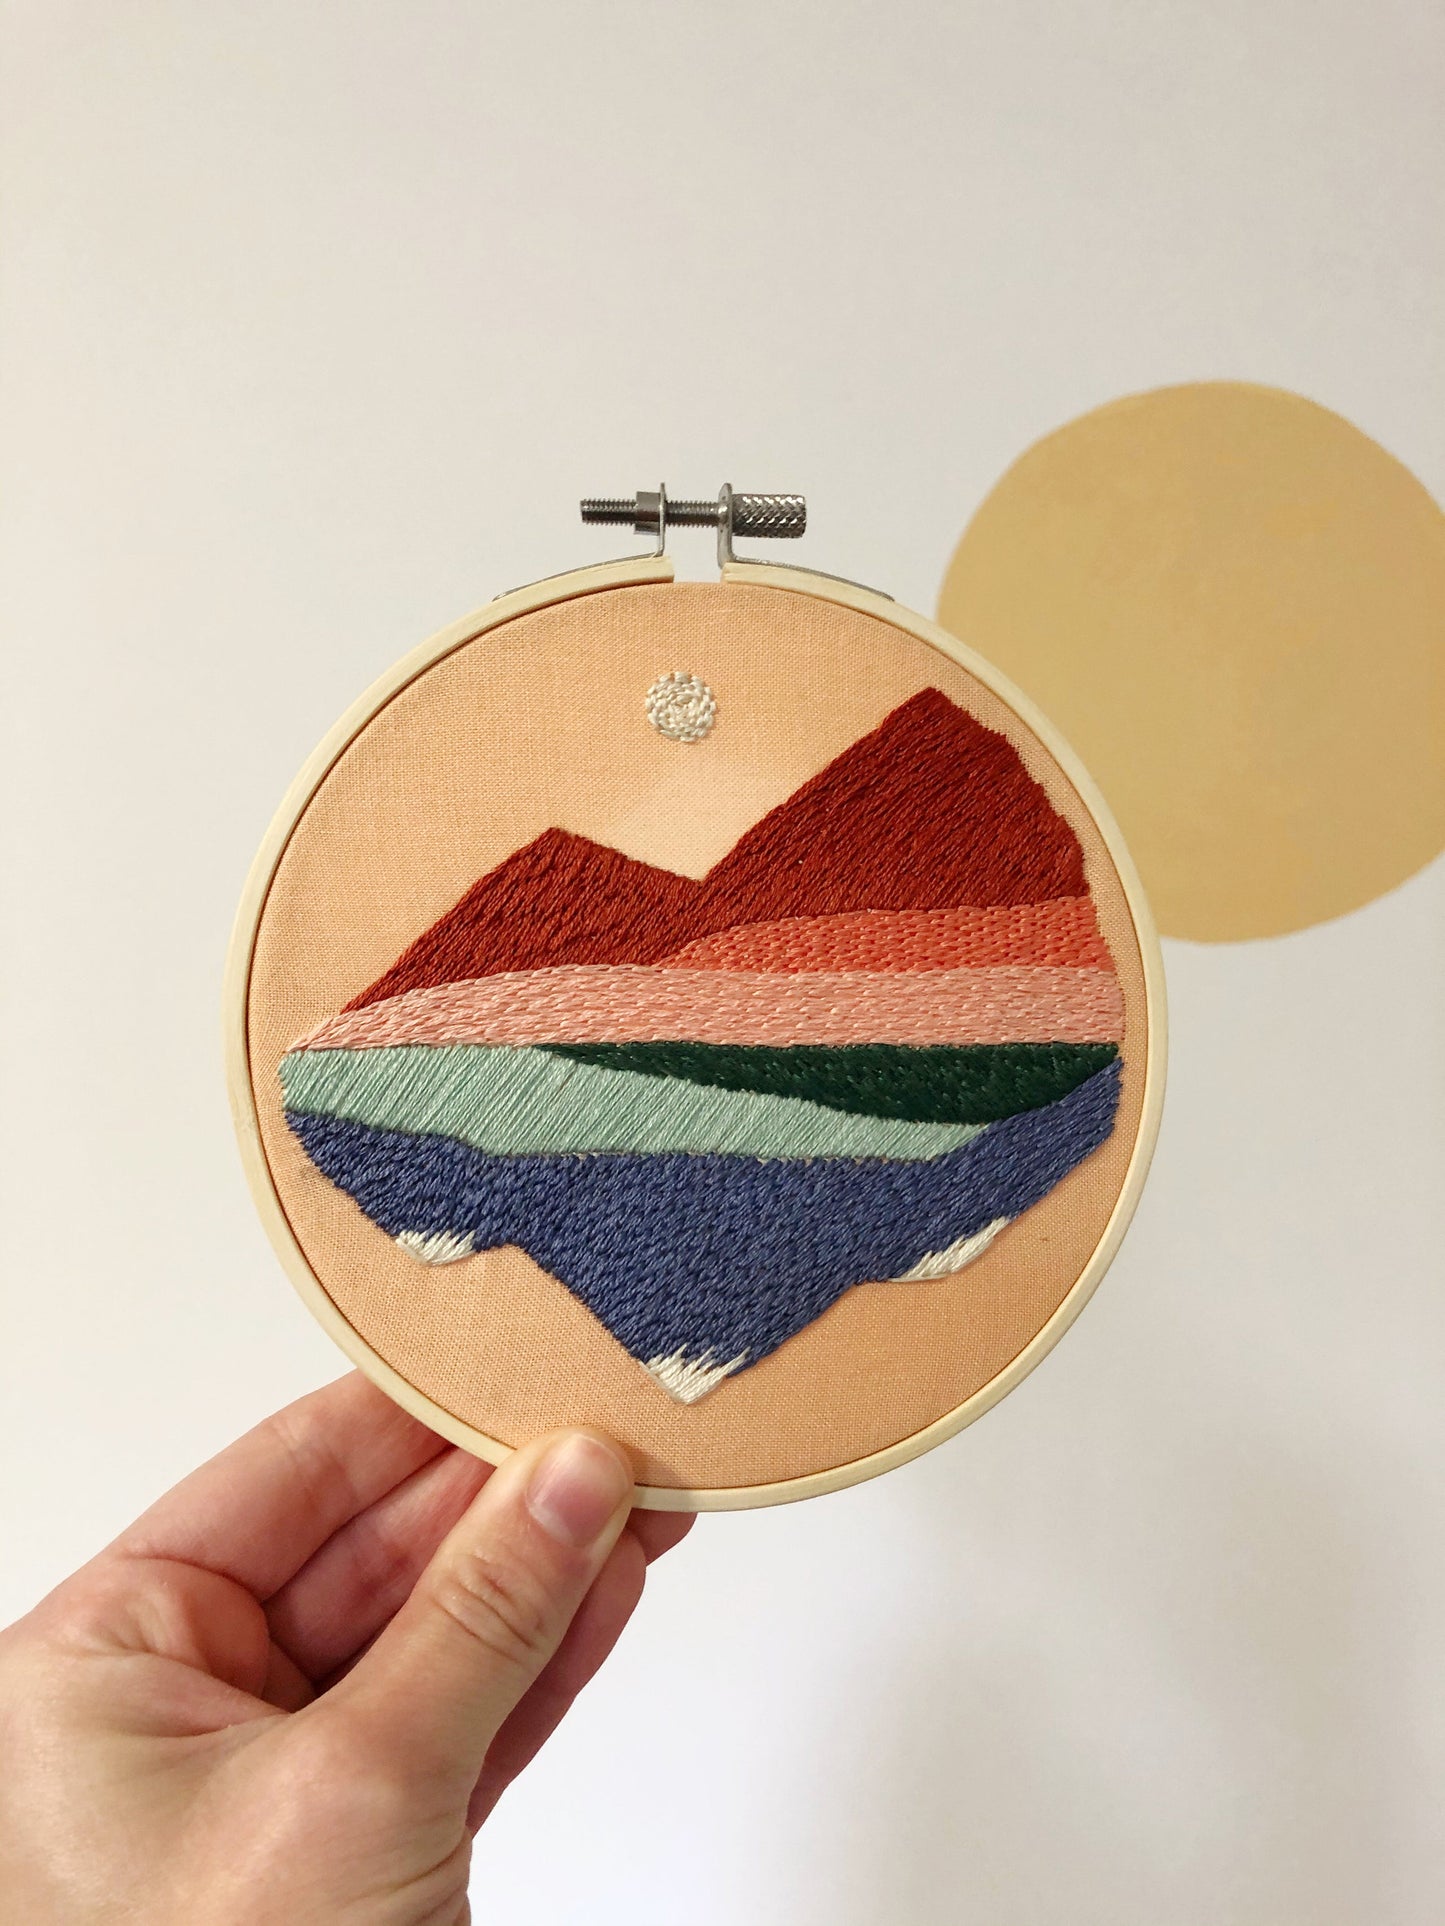 Mountainscapes - Intermediate DIY Embroidery Kit